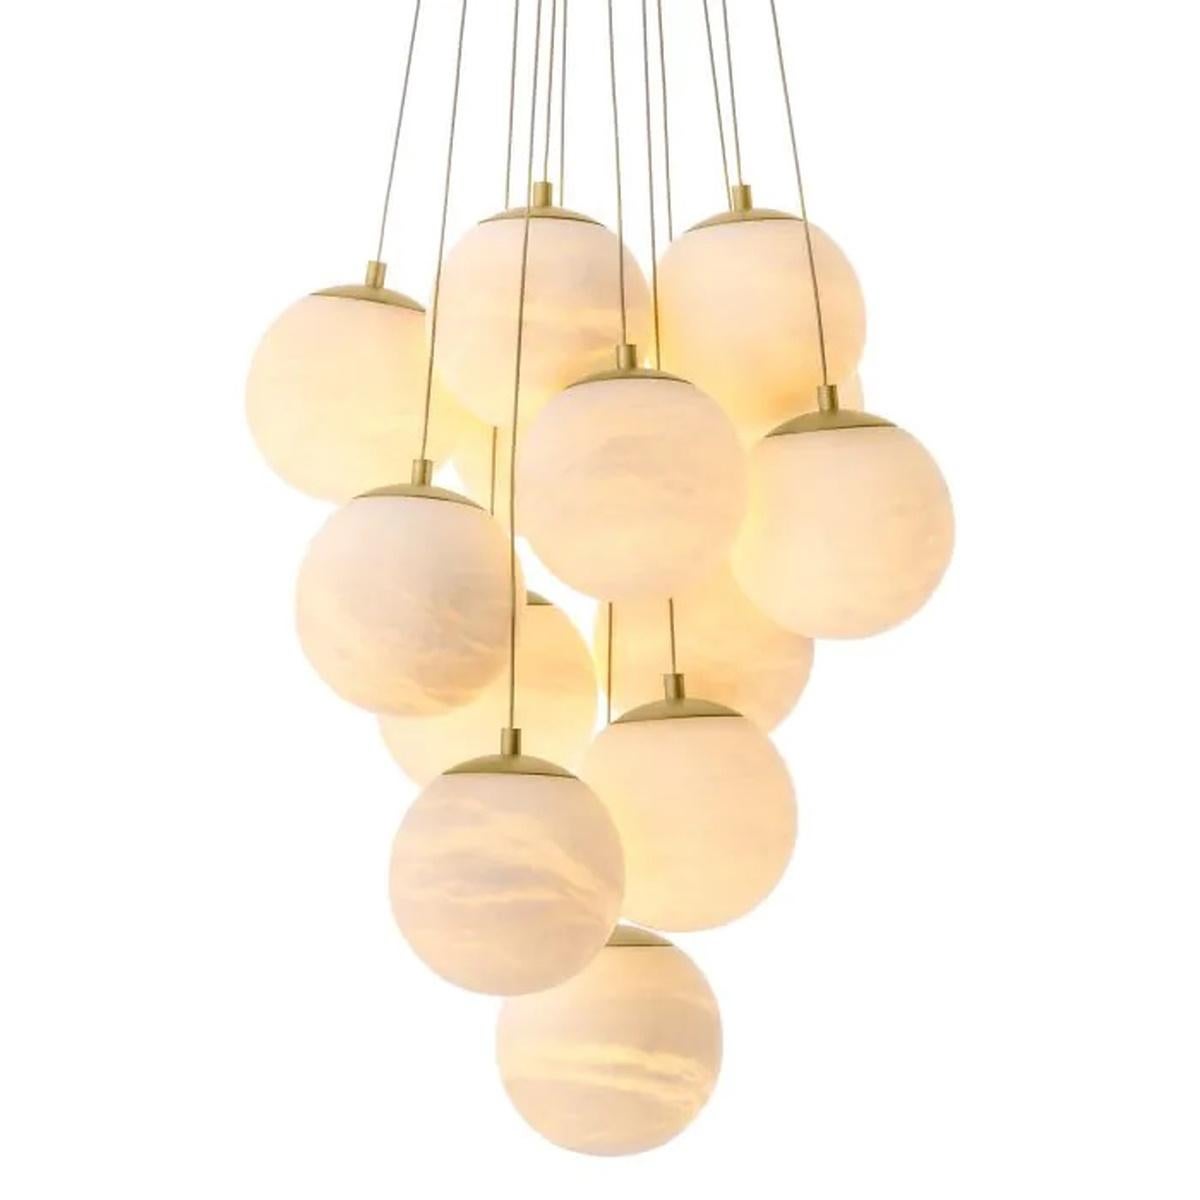 Beautiful chandelier with antique brass and alabaster finishes
Alabaster is a natural material, each piece differs in color, opacity and veining
Length hanging method 150 cm/59.06 inch
Dimensions: ø 68 x H. 90 cm.